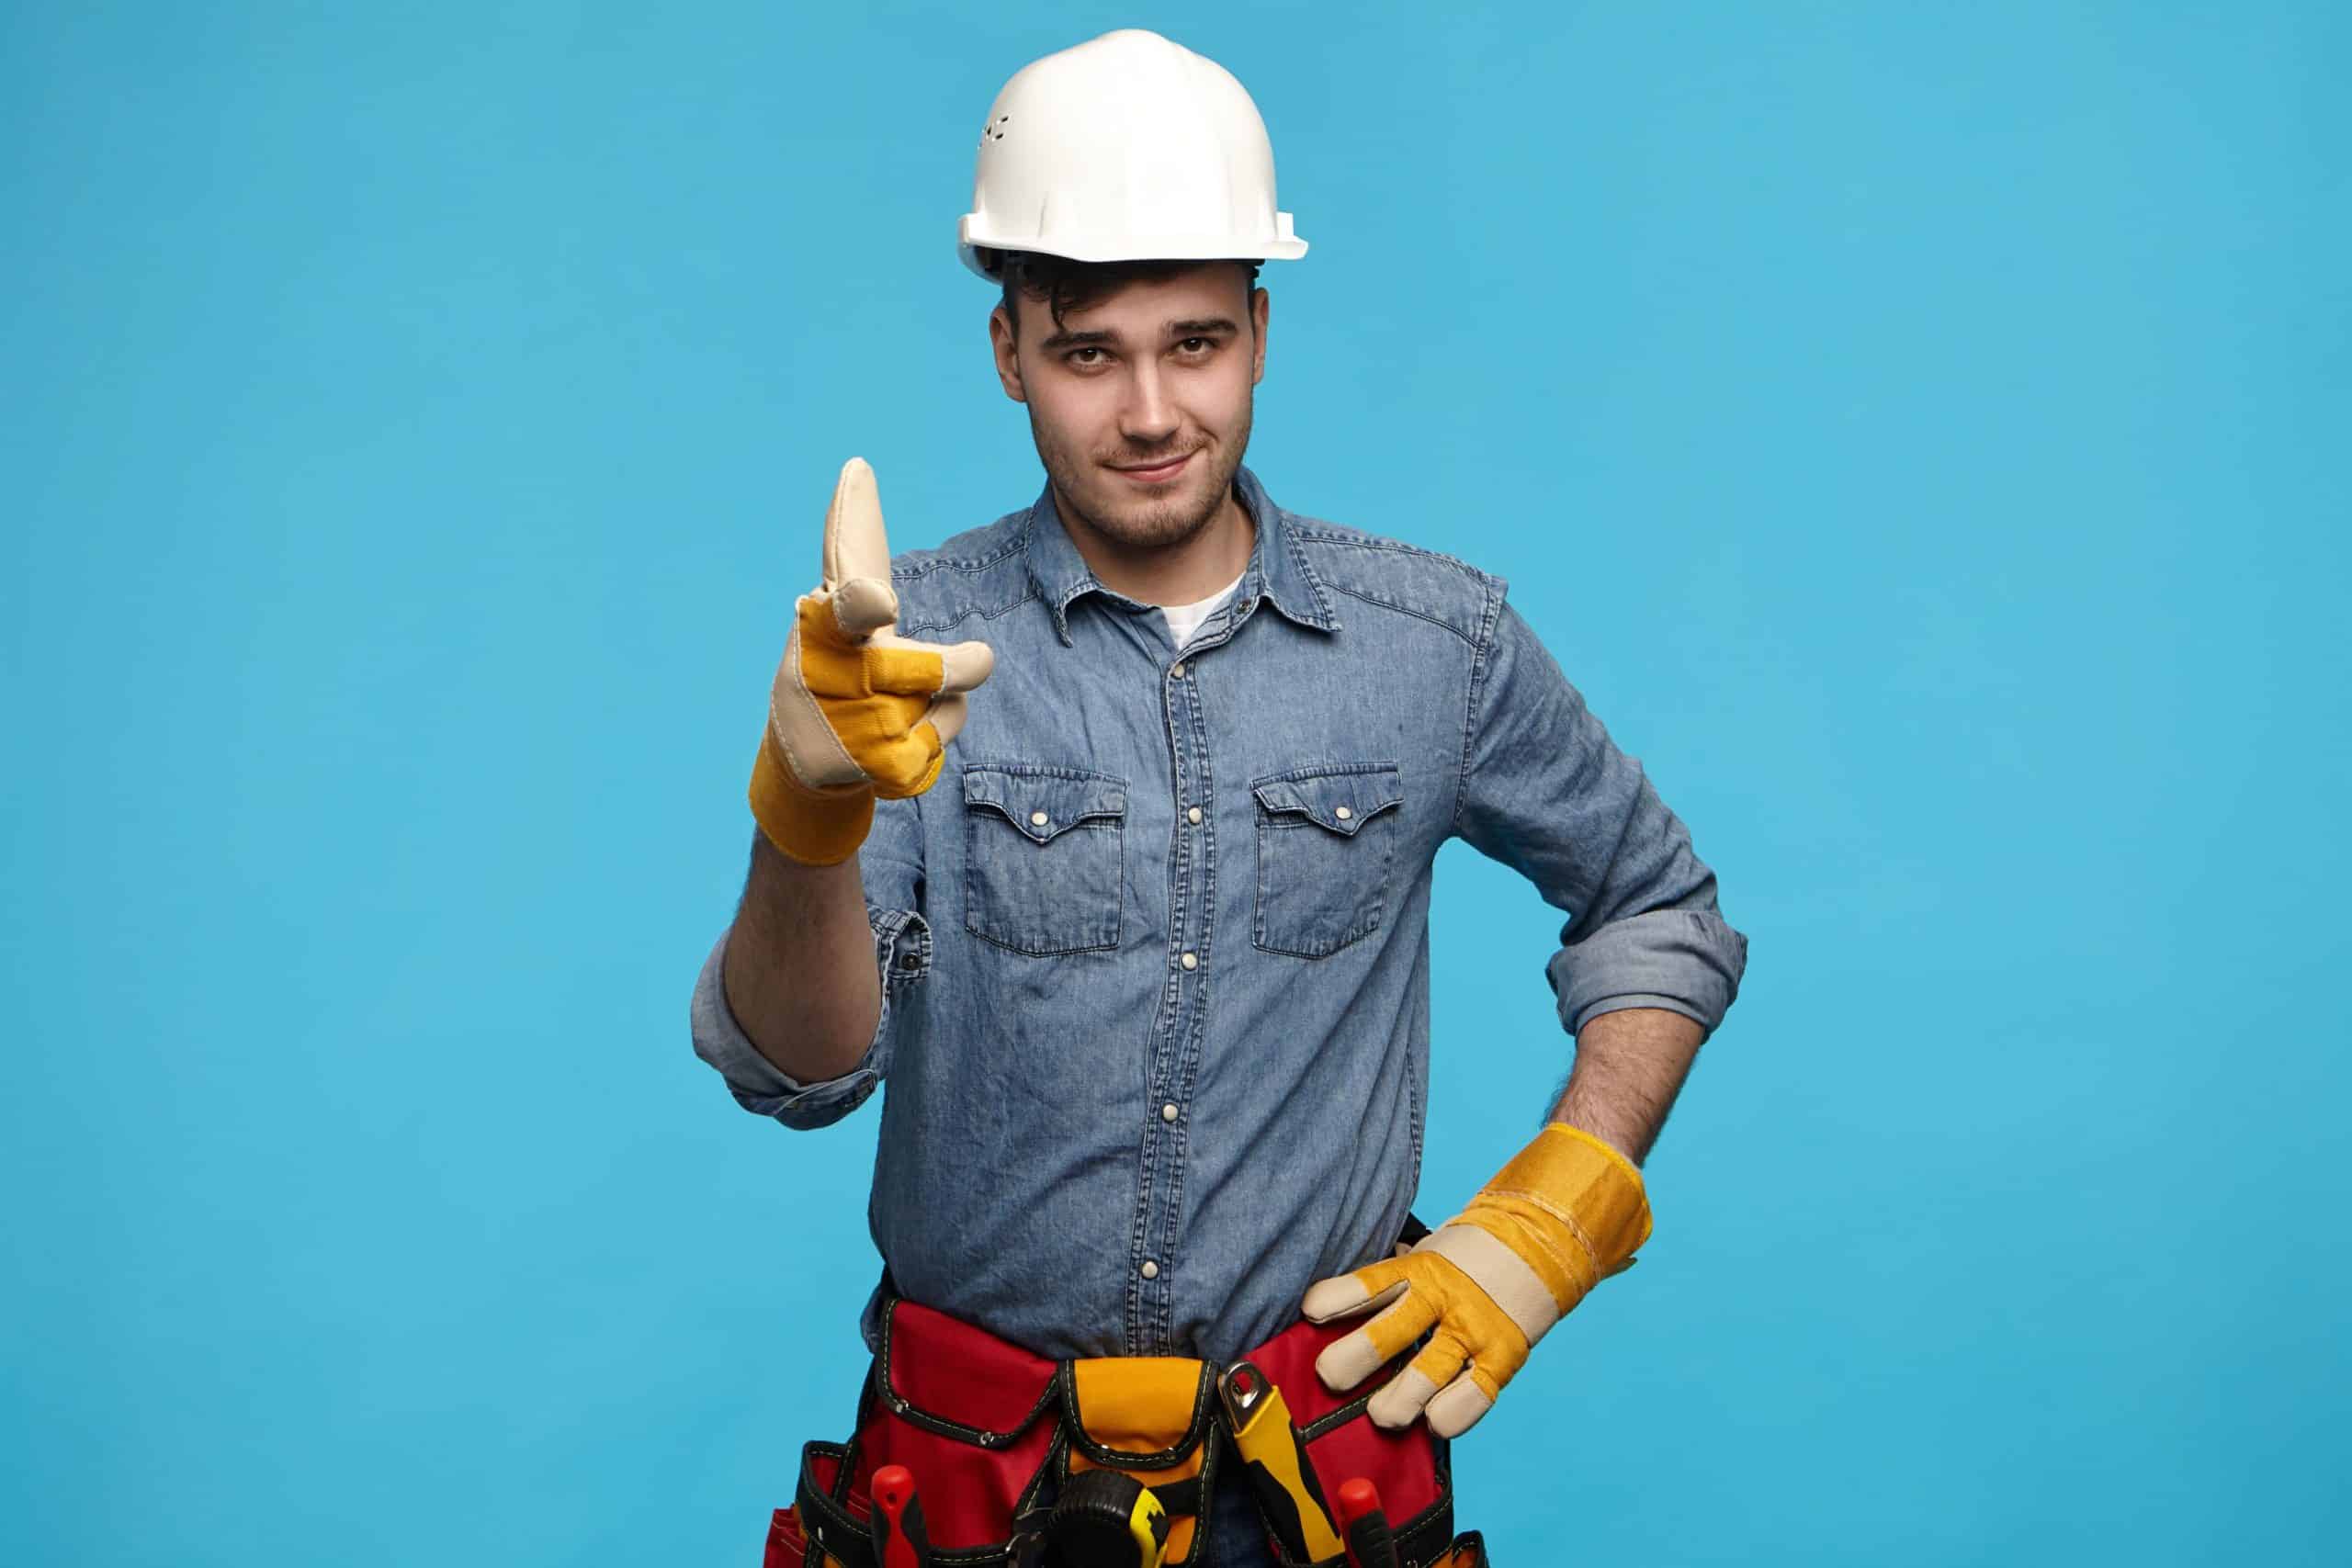 how to find and hire an electrician scaled 1